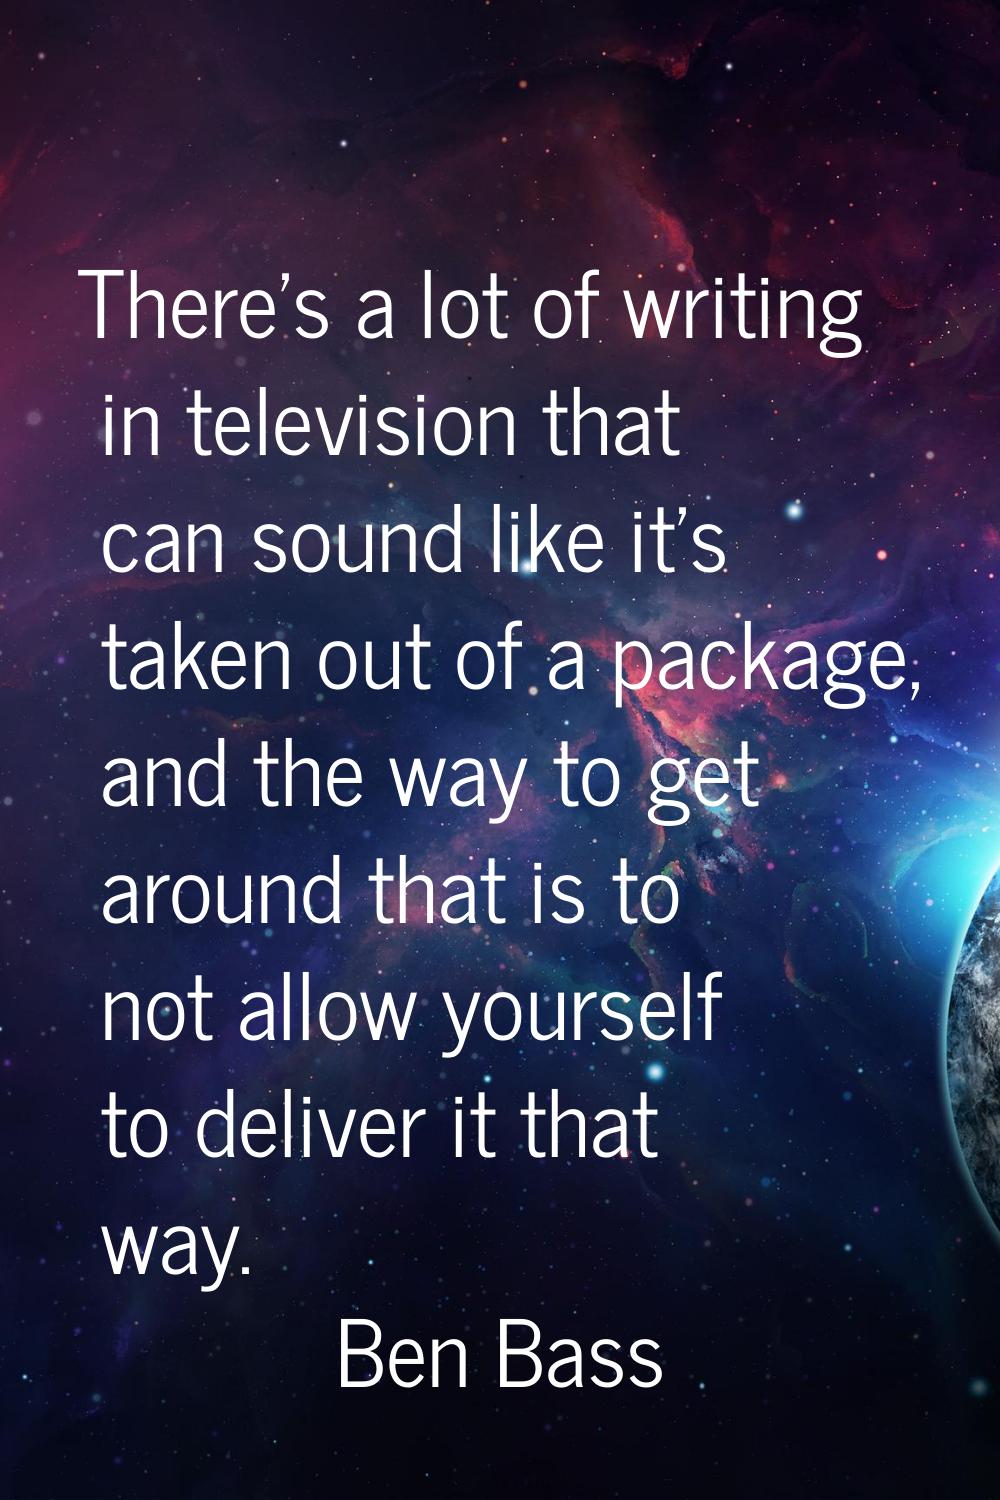 There's a lot of writing in television that can sound like it's taken out of a package, and the way